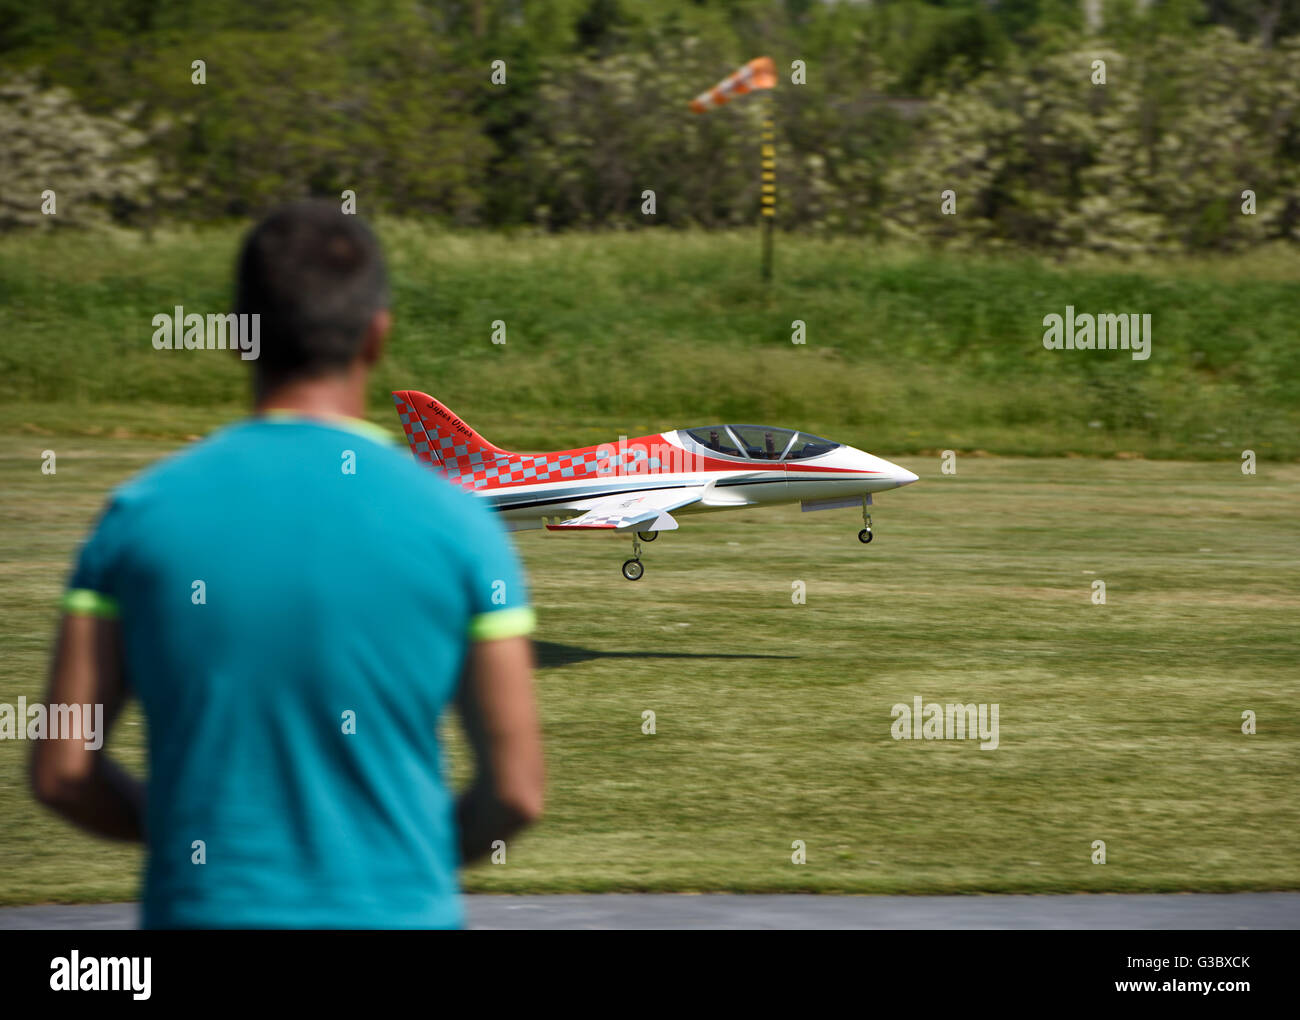 Hobbyist landing a radio controlled jet scale model with electric engine on grass runway Stock Photo